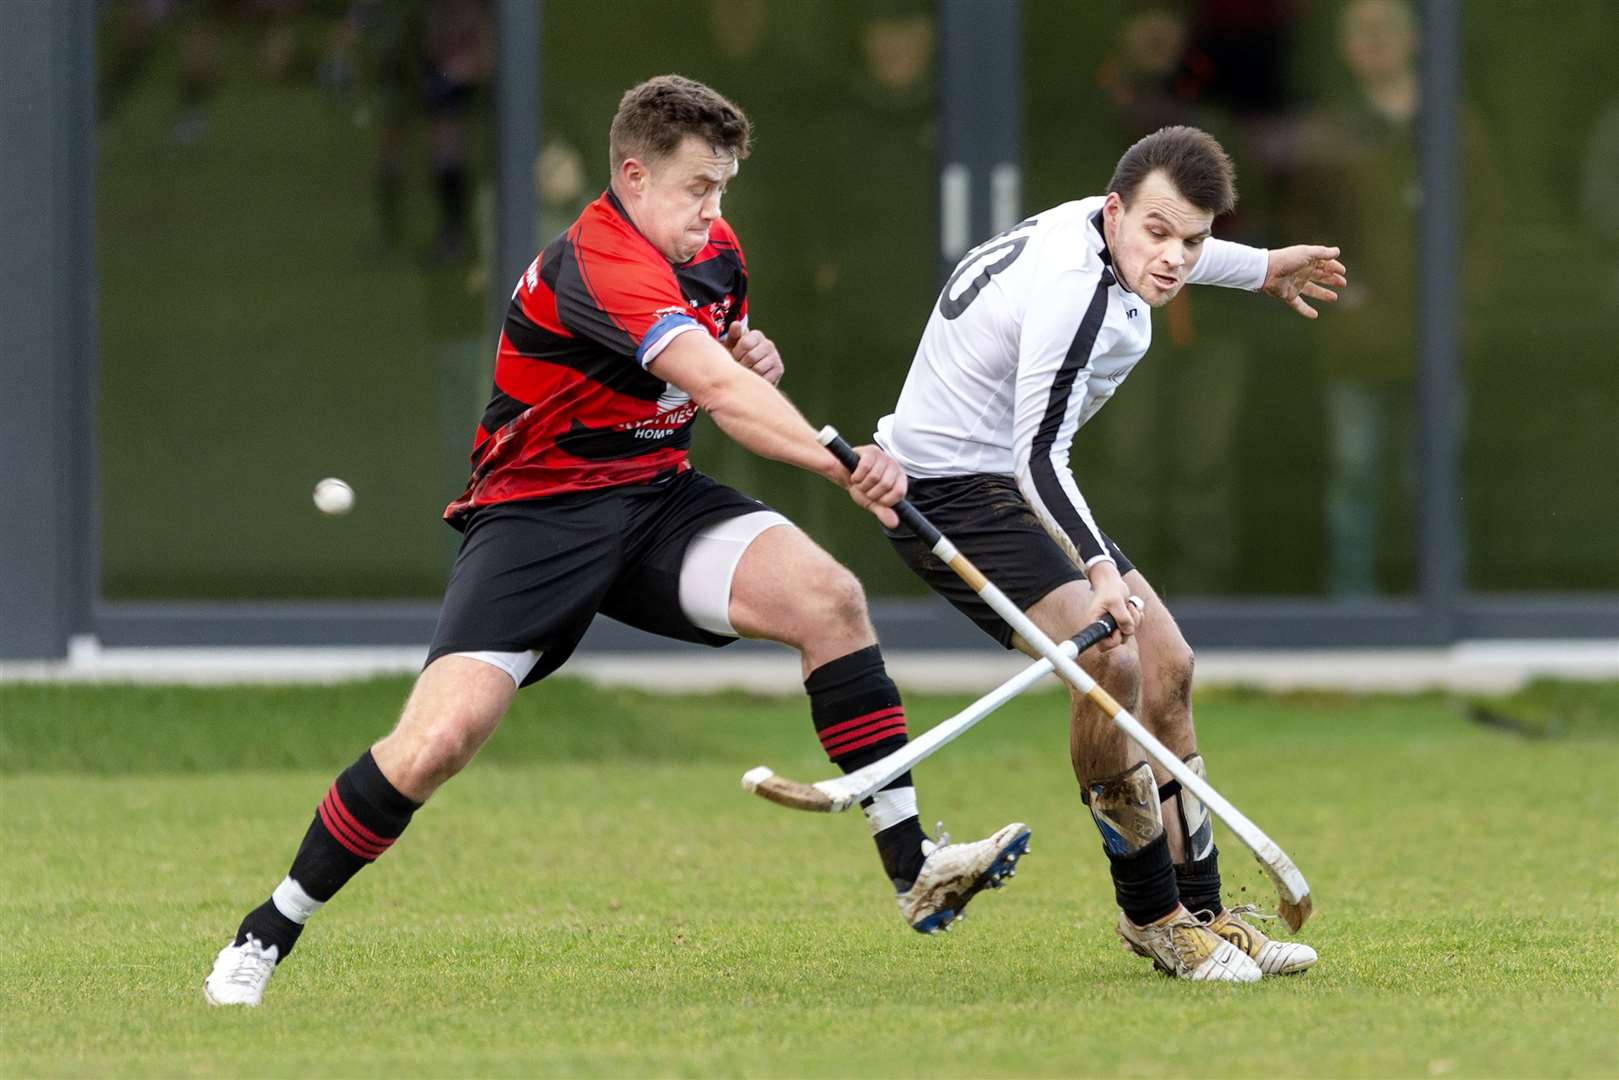 Just one game into the campaign, the 2020 shinty season has been cancelled because of the pandemic. Picture: Neil Paterson